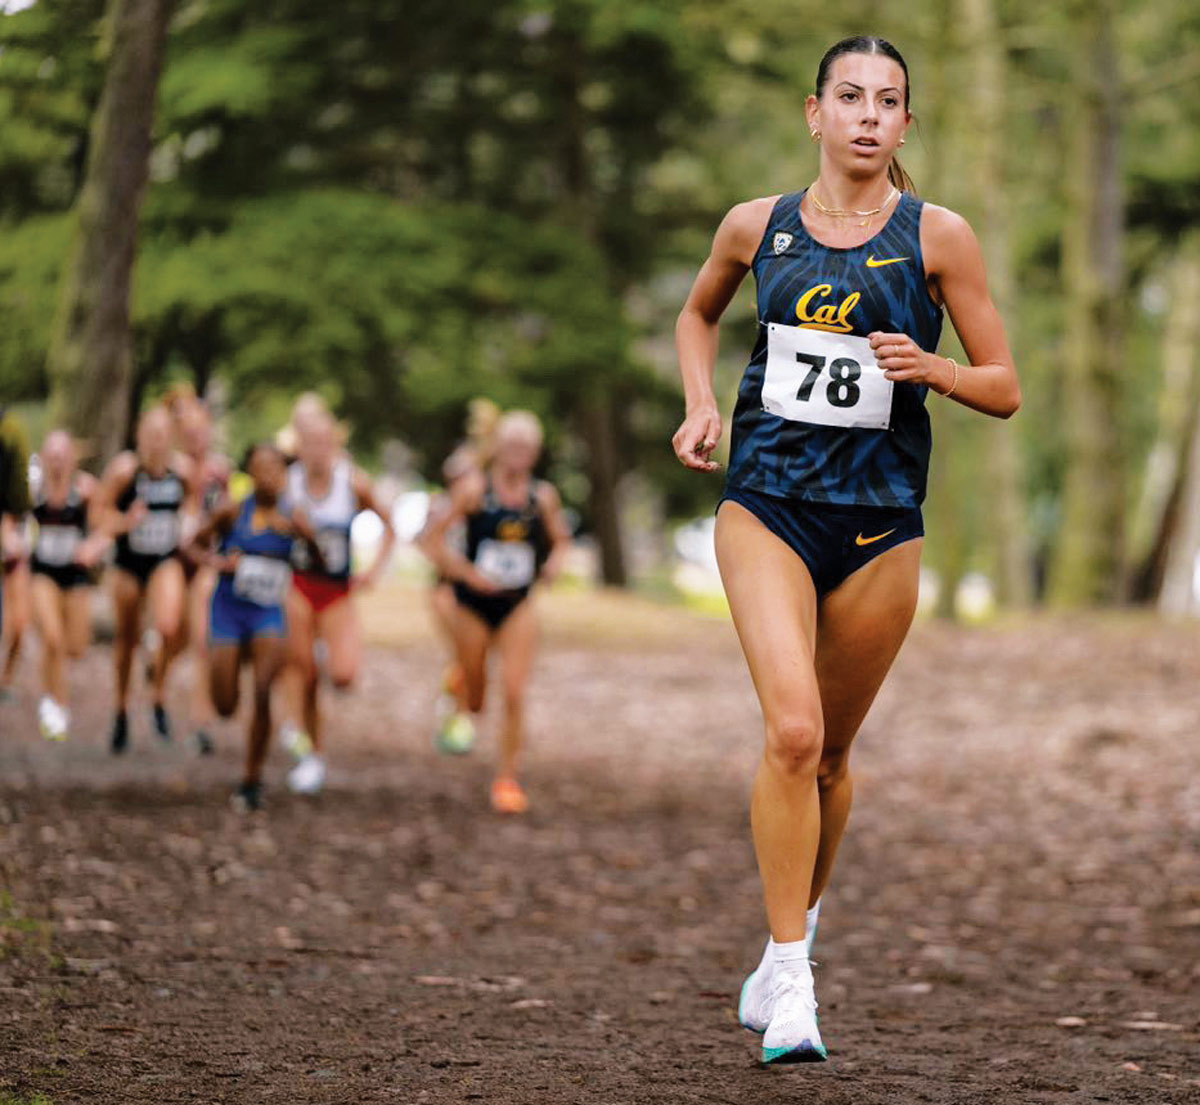 Anastasia Snodgrass wearing her running uniform while running in a wooded area